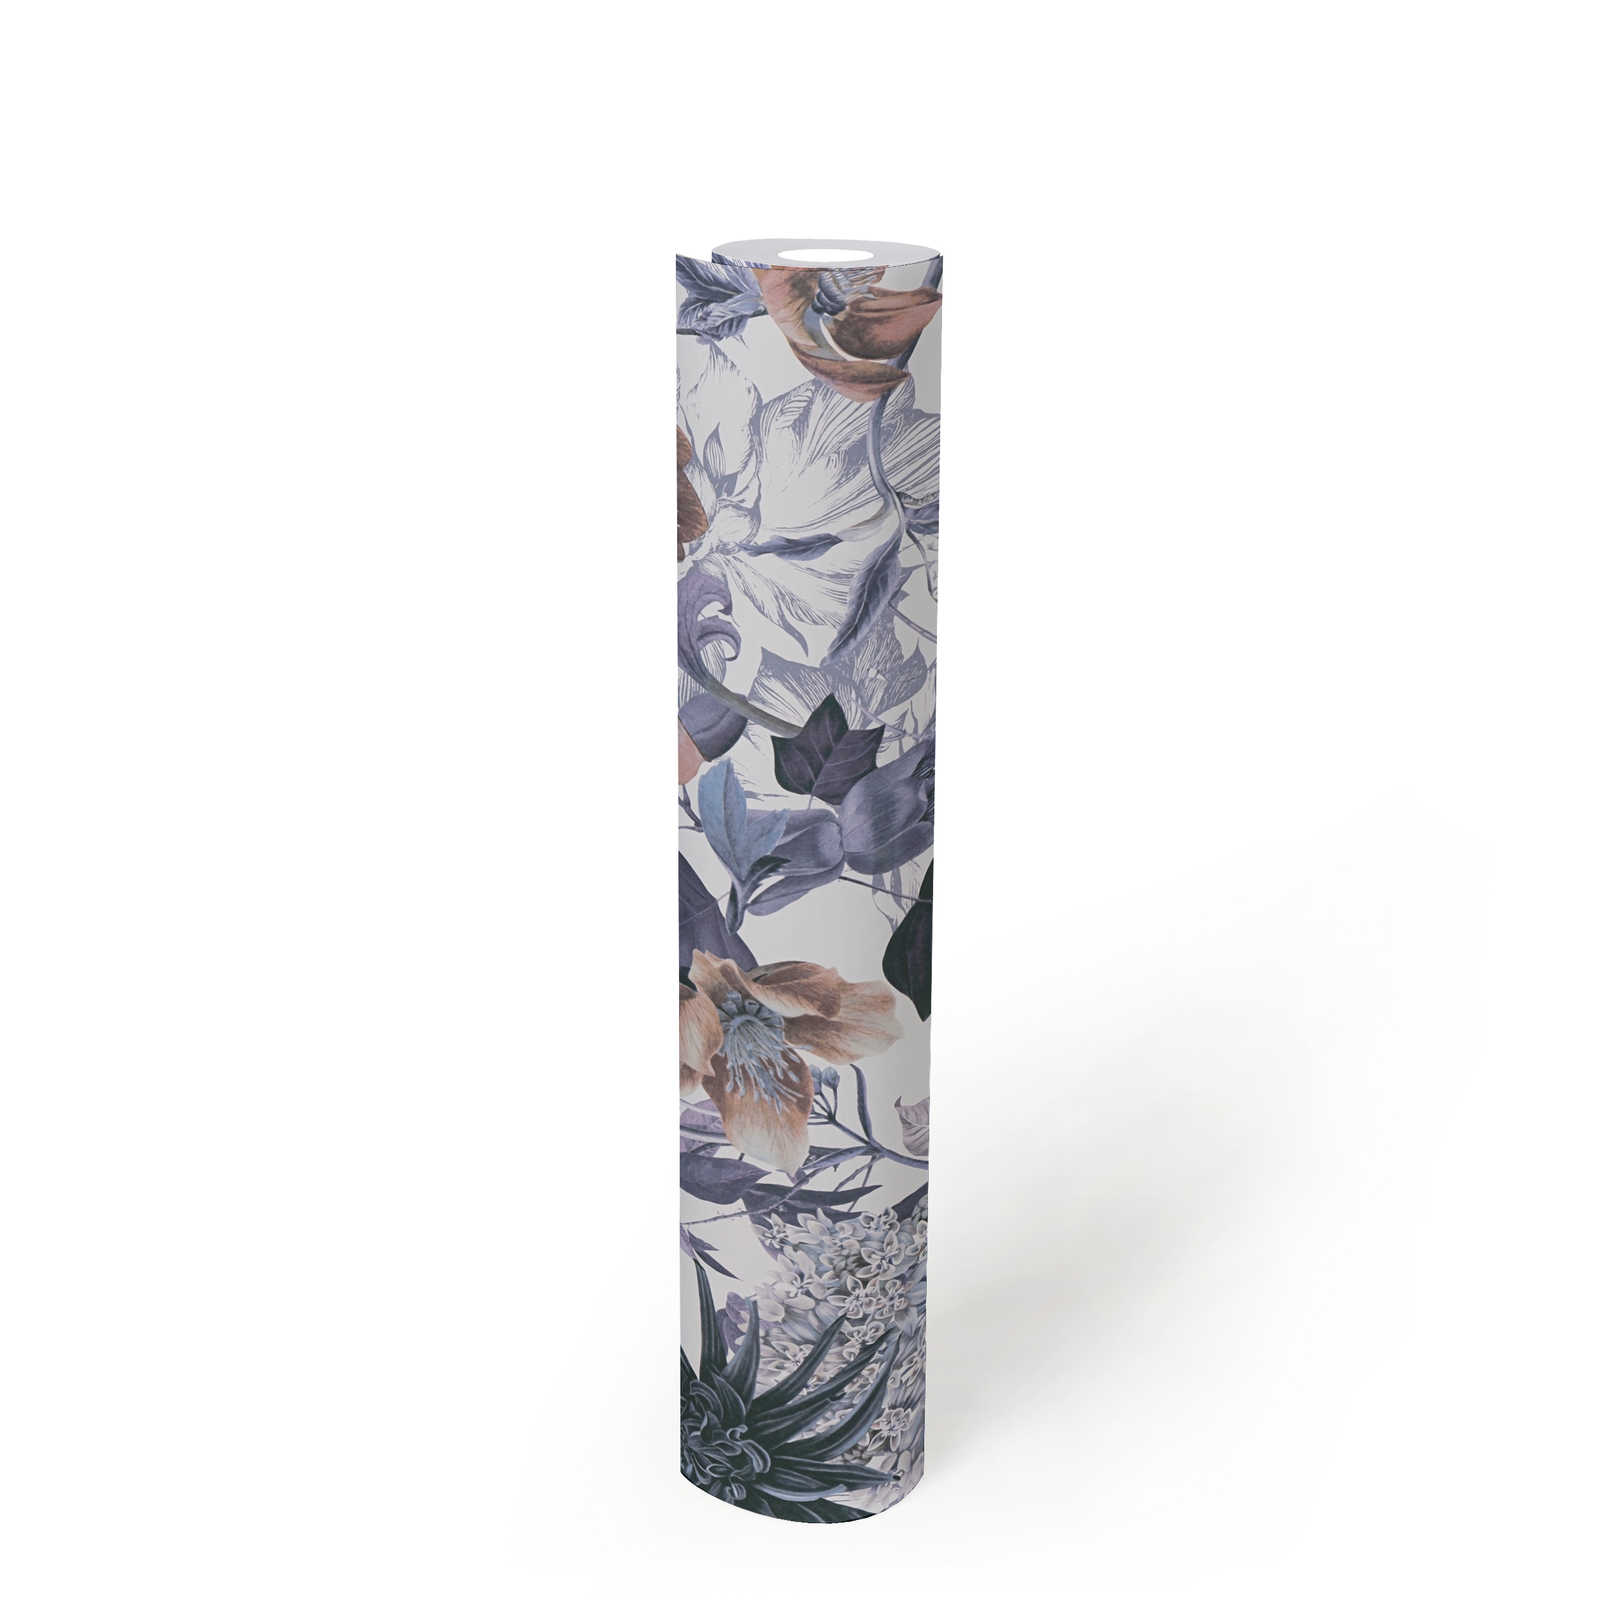             Floral wallpaper with floral pattern - blue, brown, grey
        